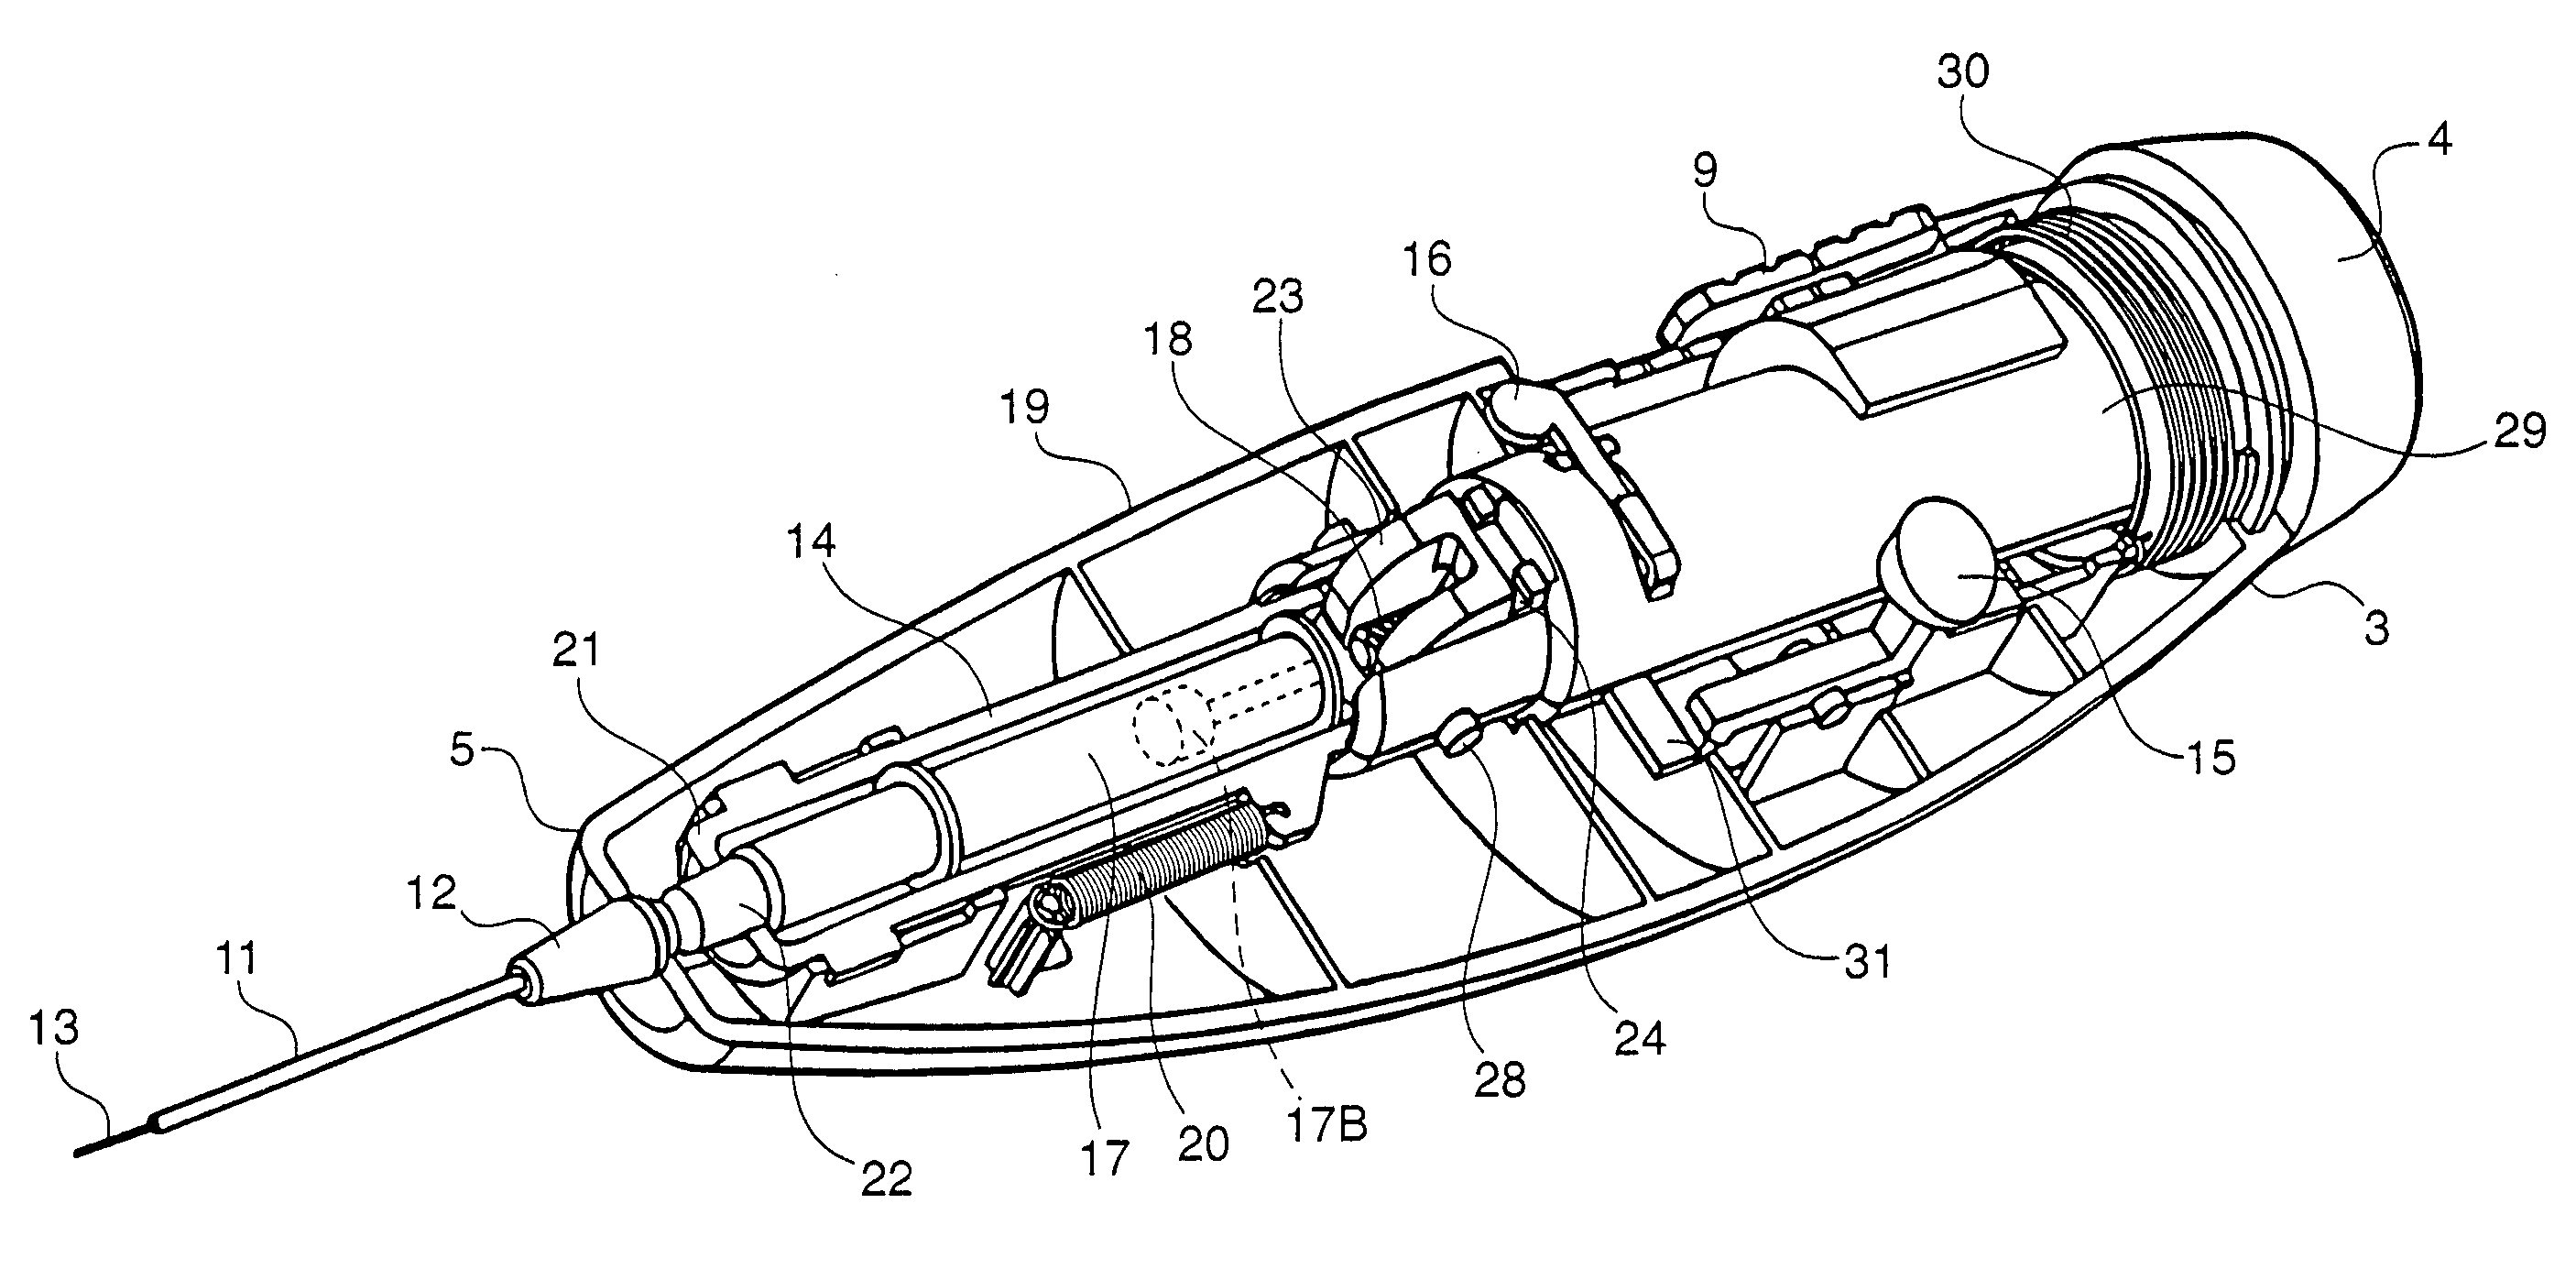 Catheter device and method for delivering a dose internally during minimally-invasive surgery